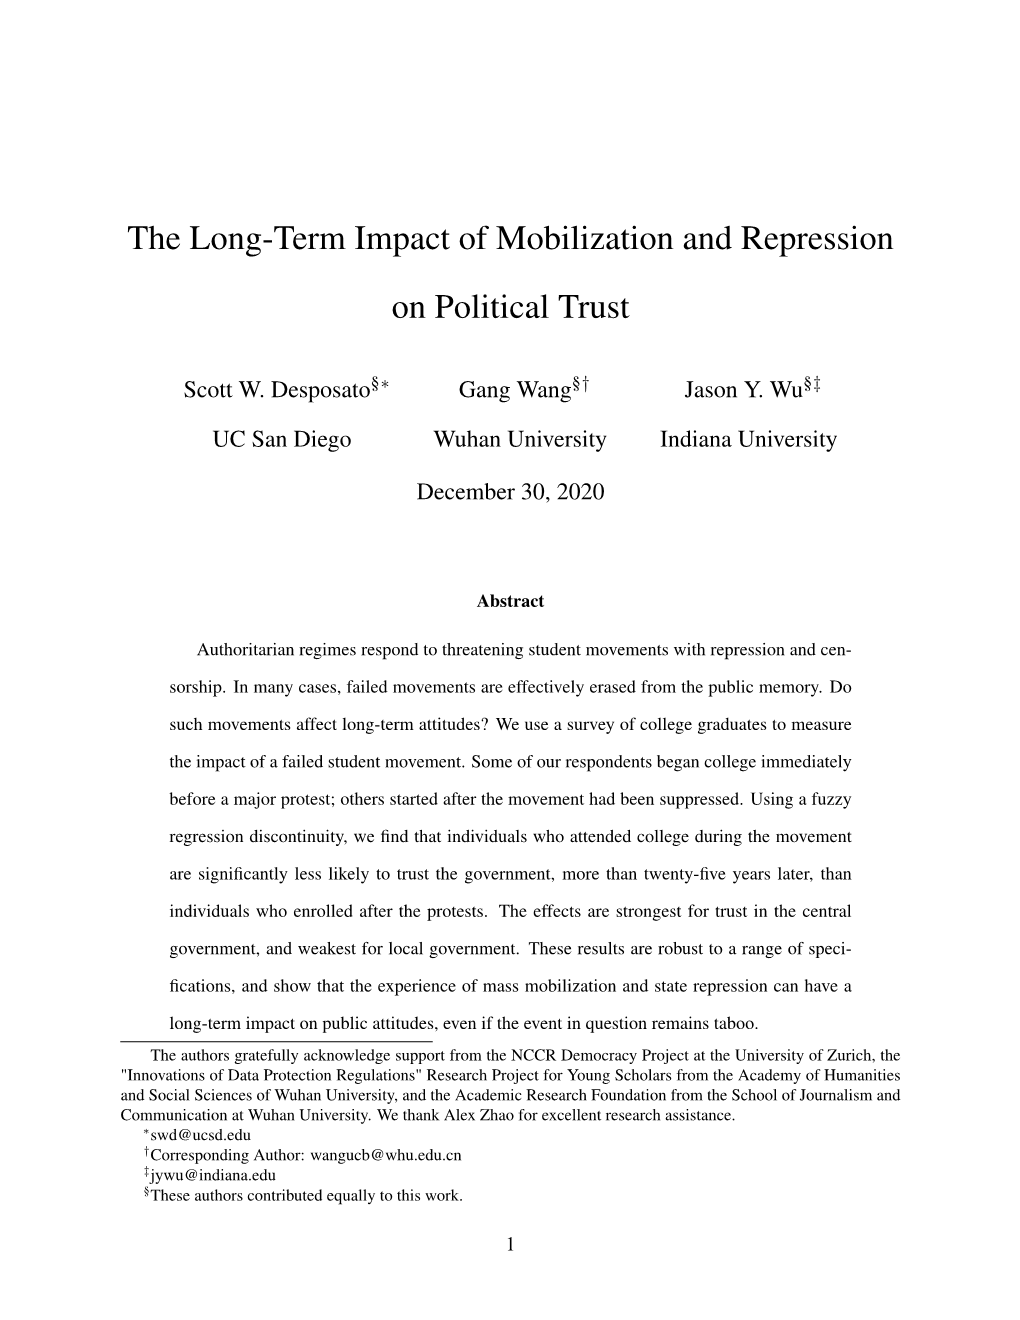 The Long-Term Impact of Mobilization and Repression on Political Trust